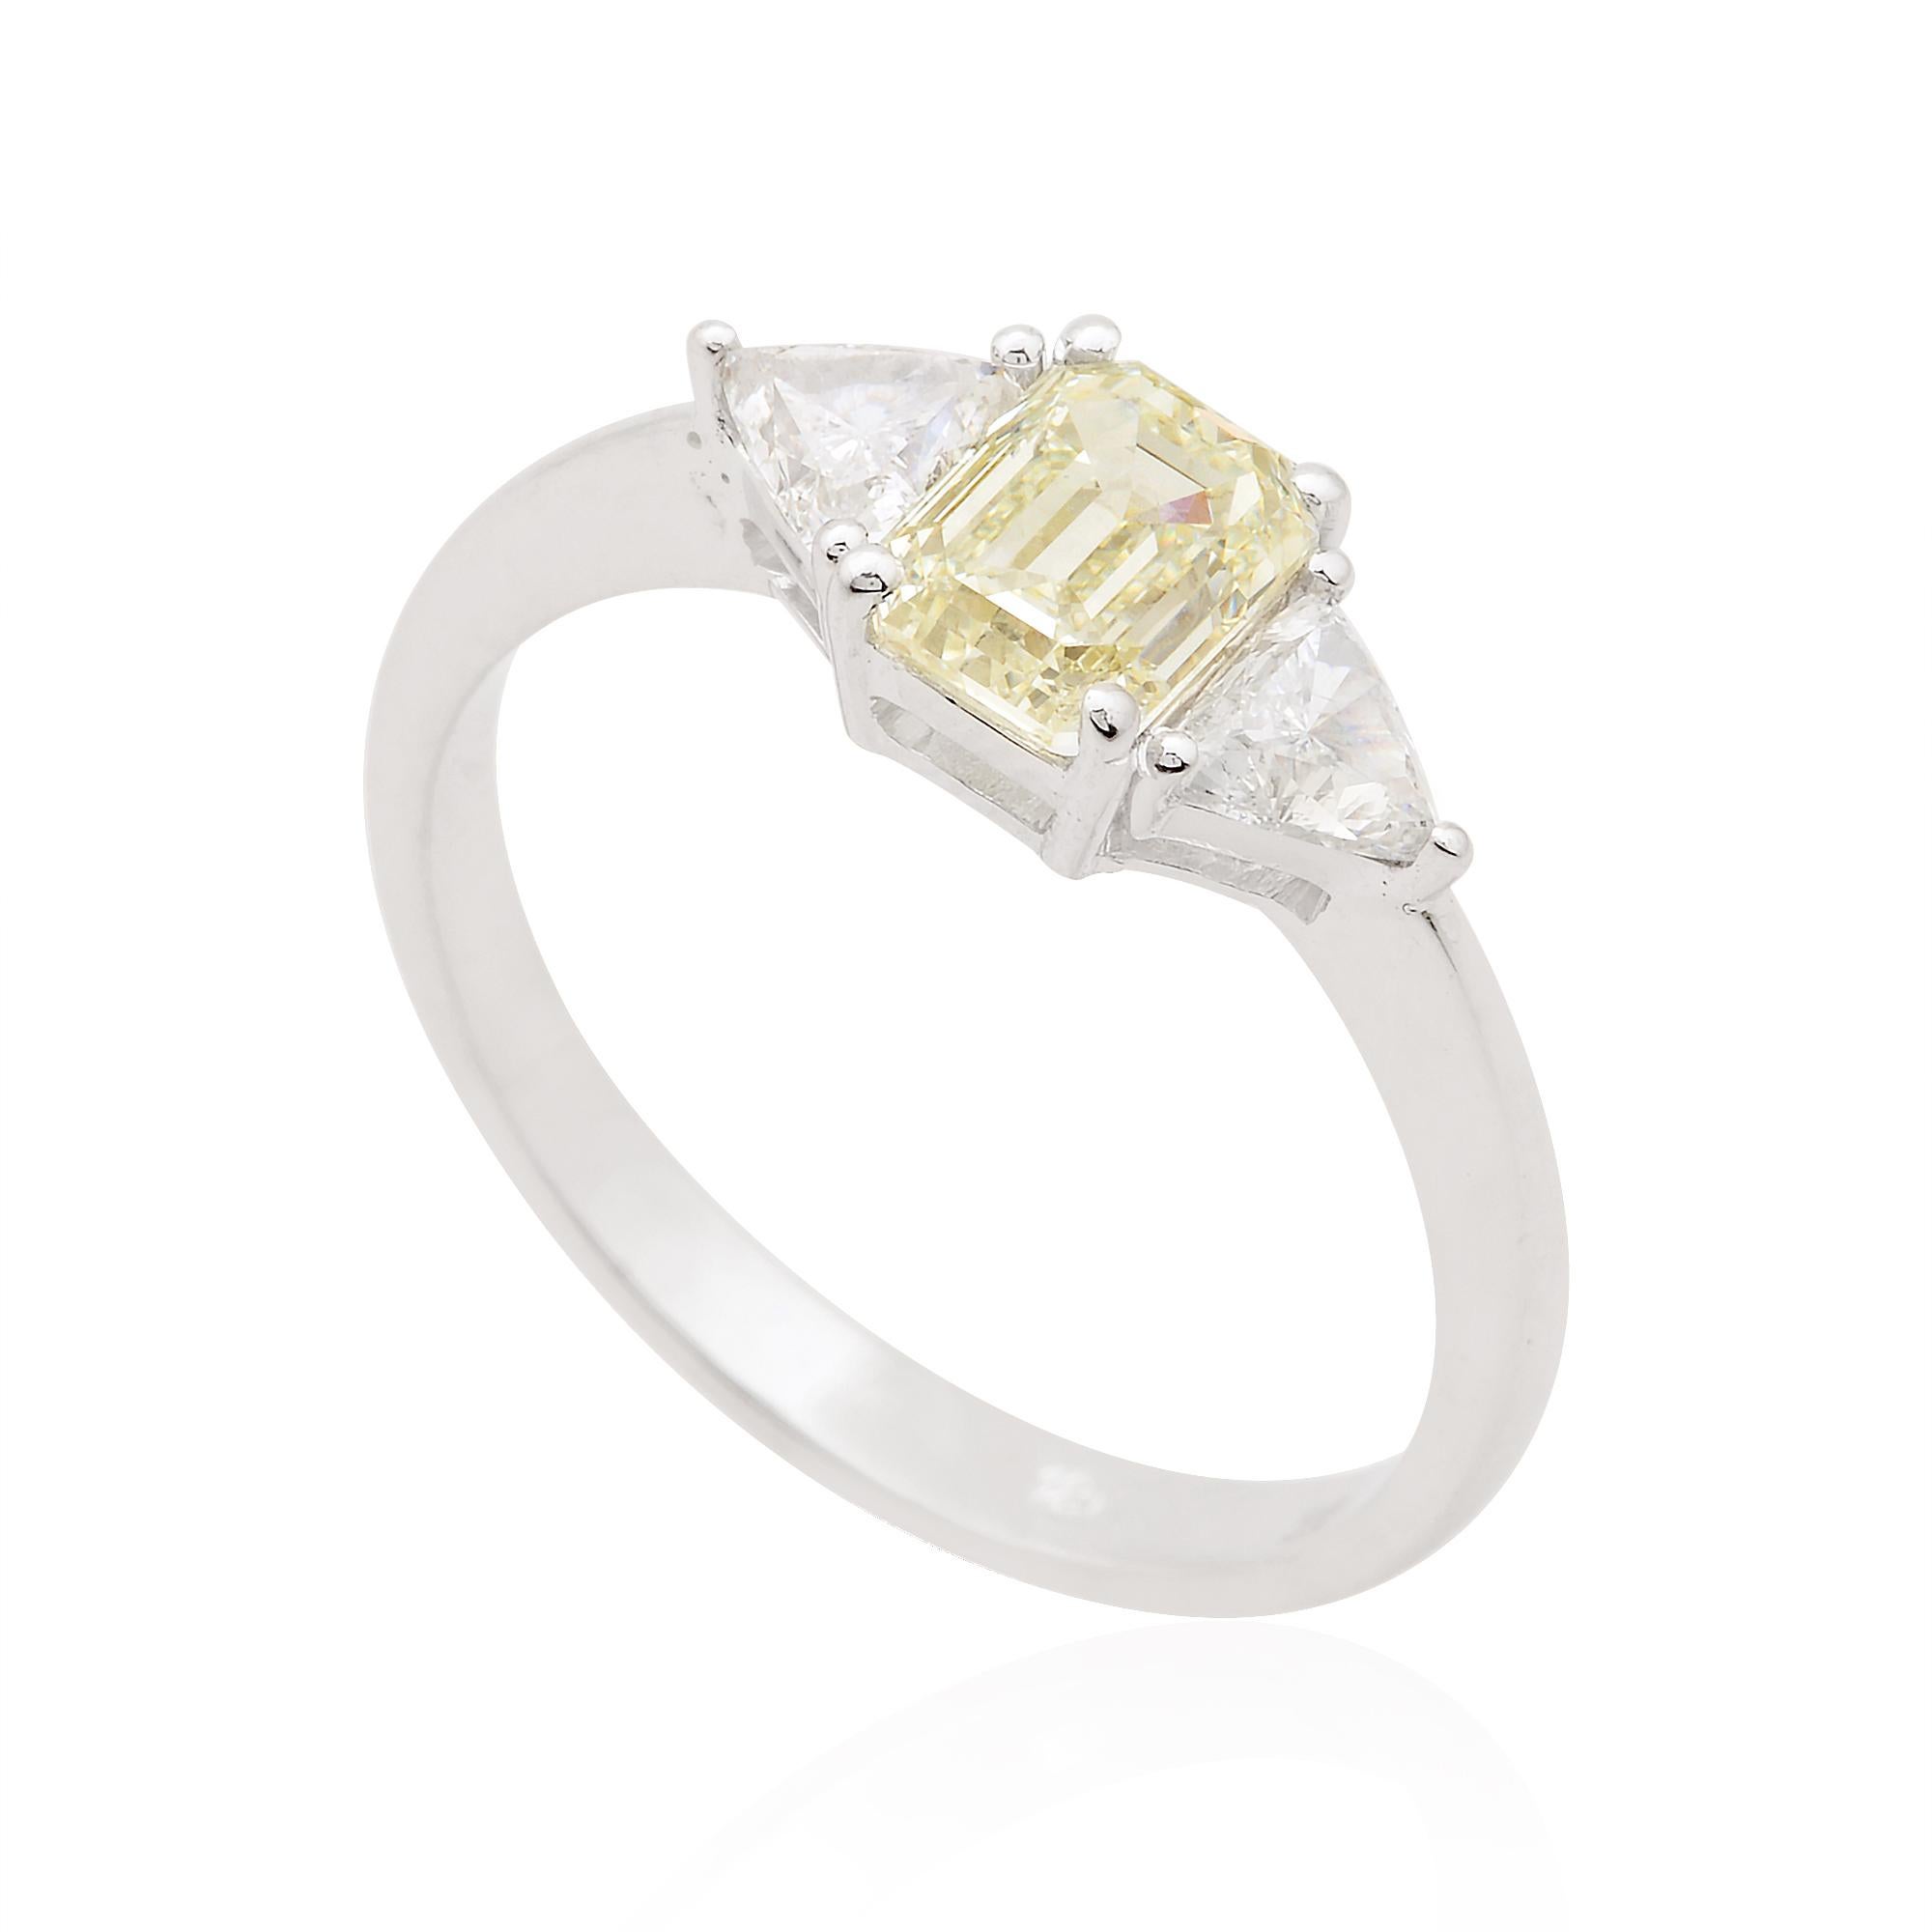 For Sale:  Natural 1.53 Carat SI Clarity HI Color Diamond Ring Solid 18k White Gold Jewelry 5